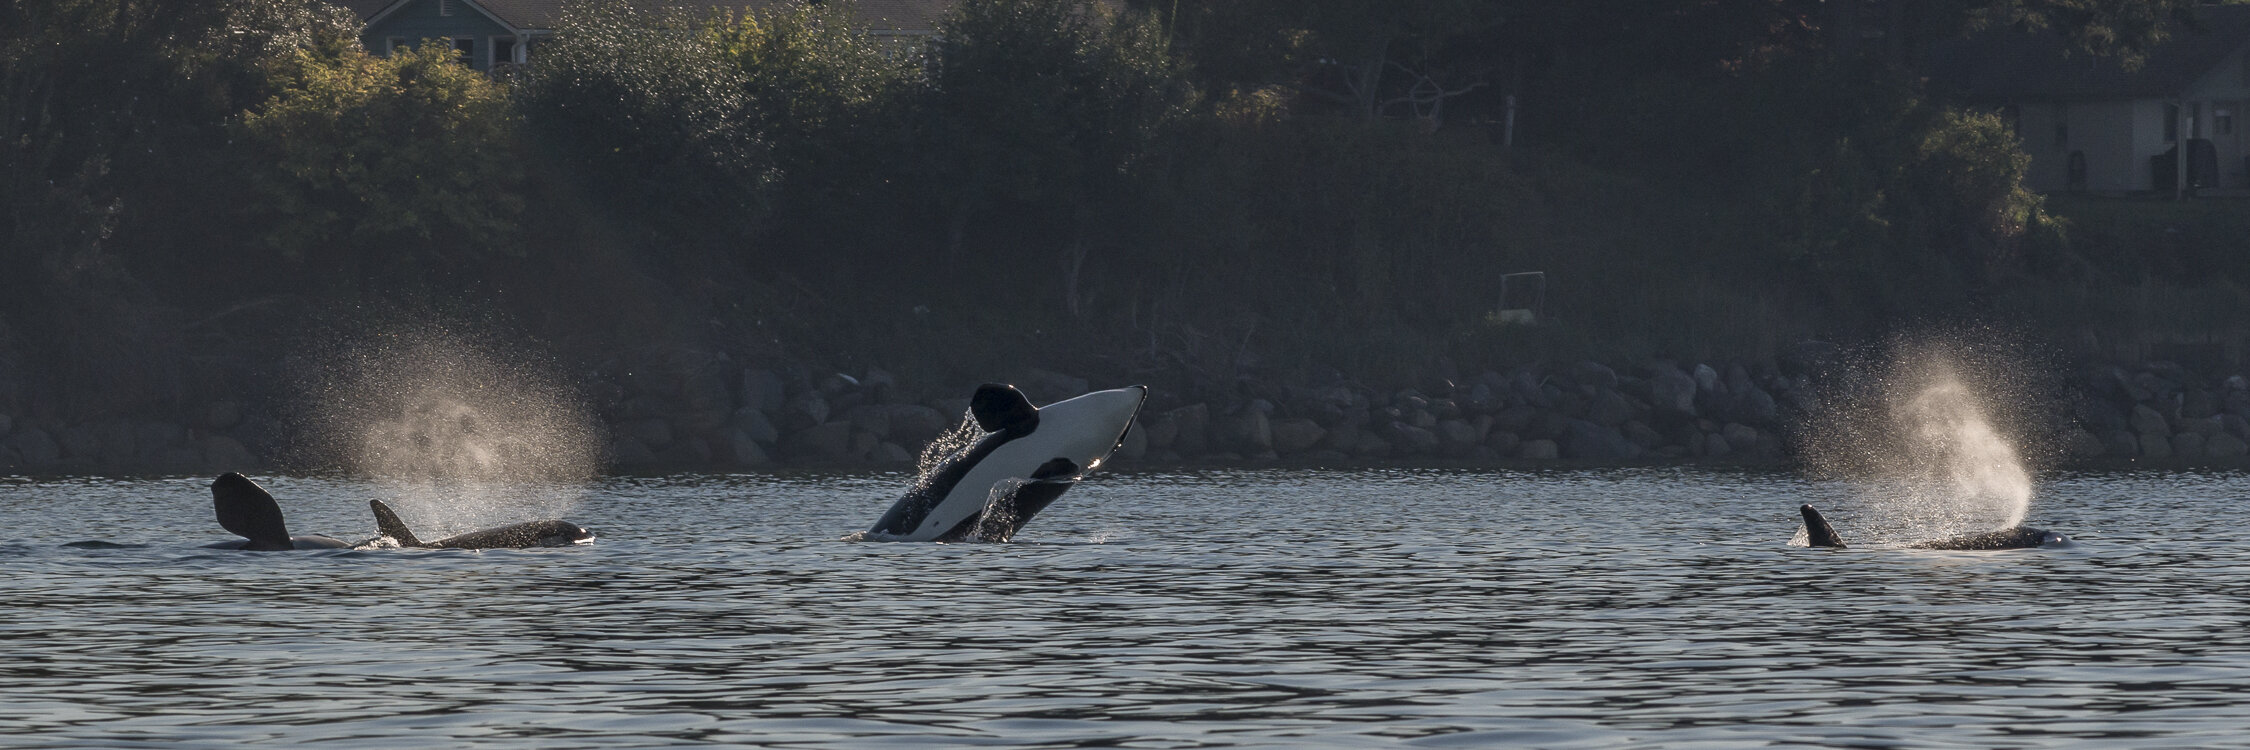 Northern Resident Killer Whales